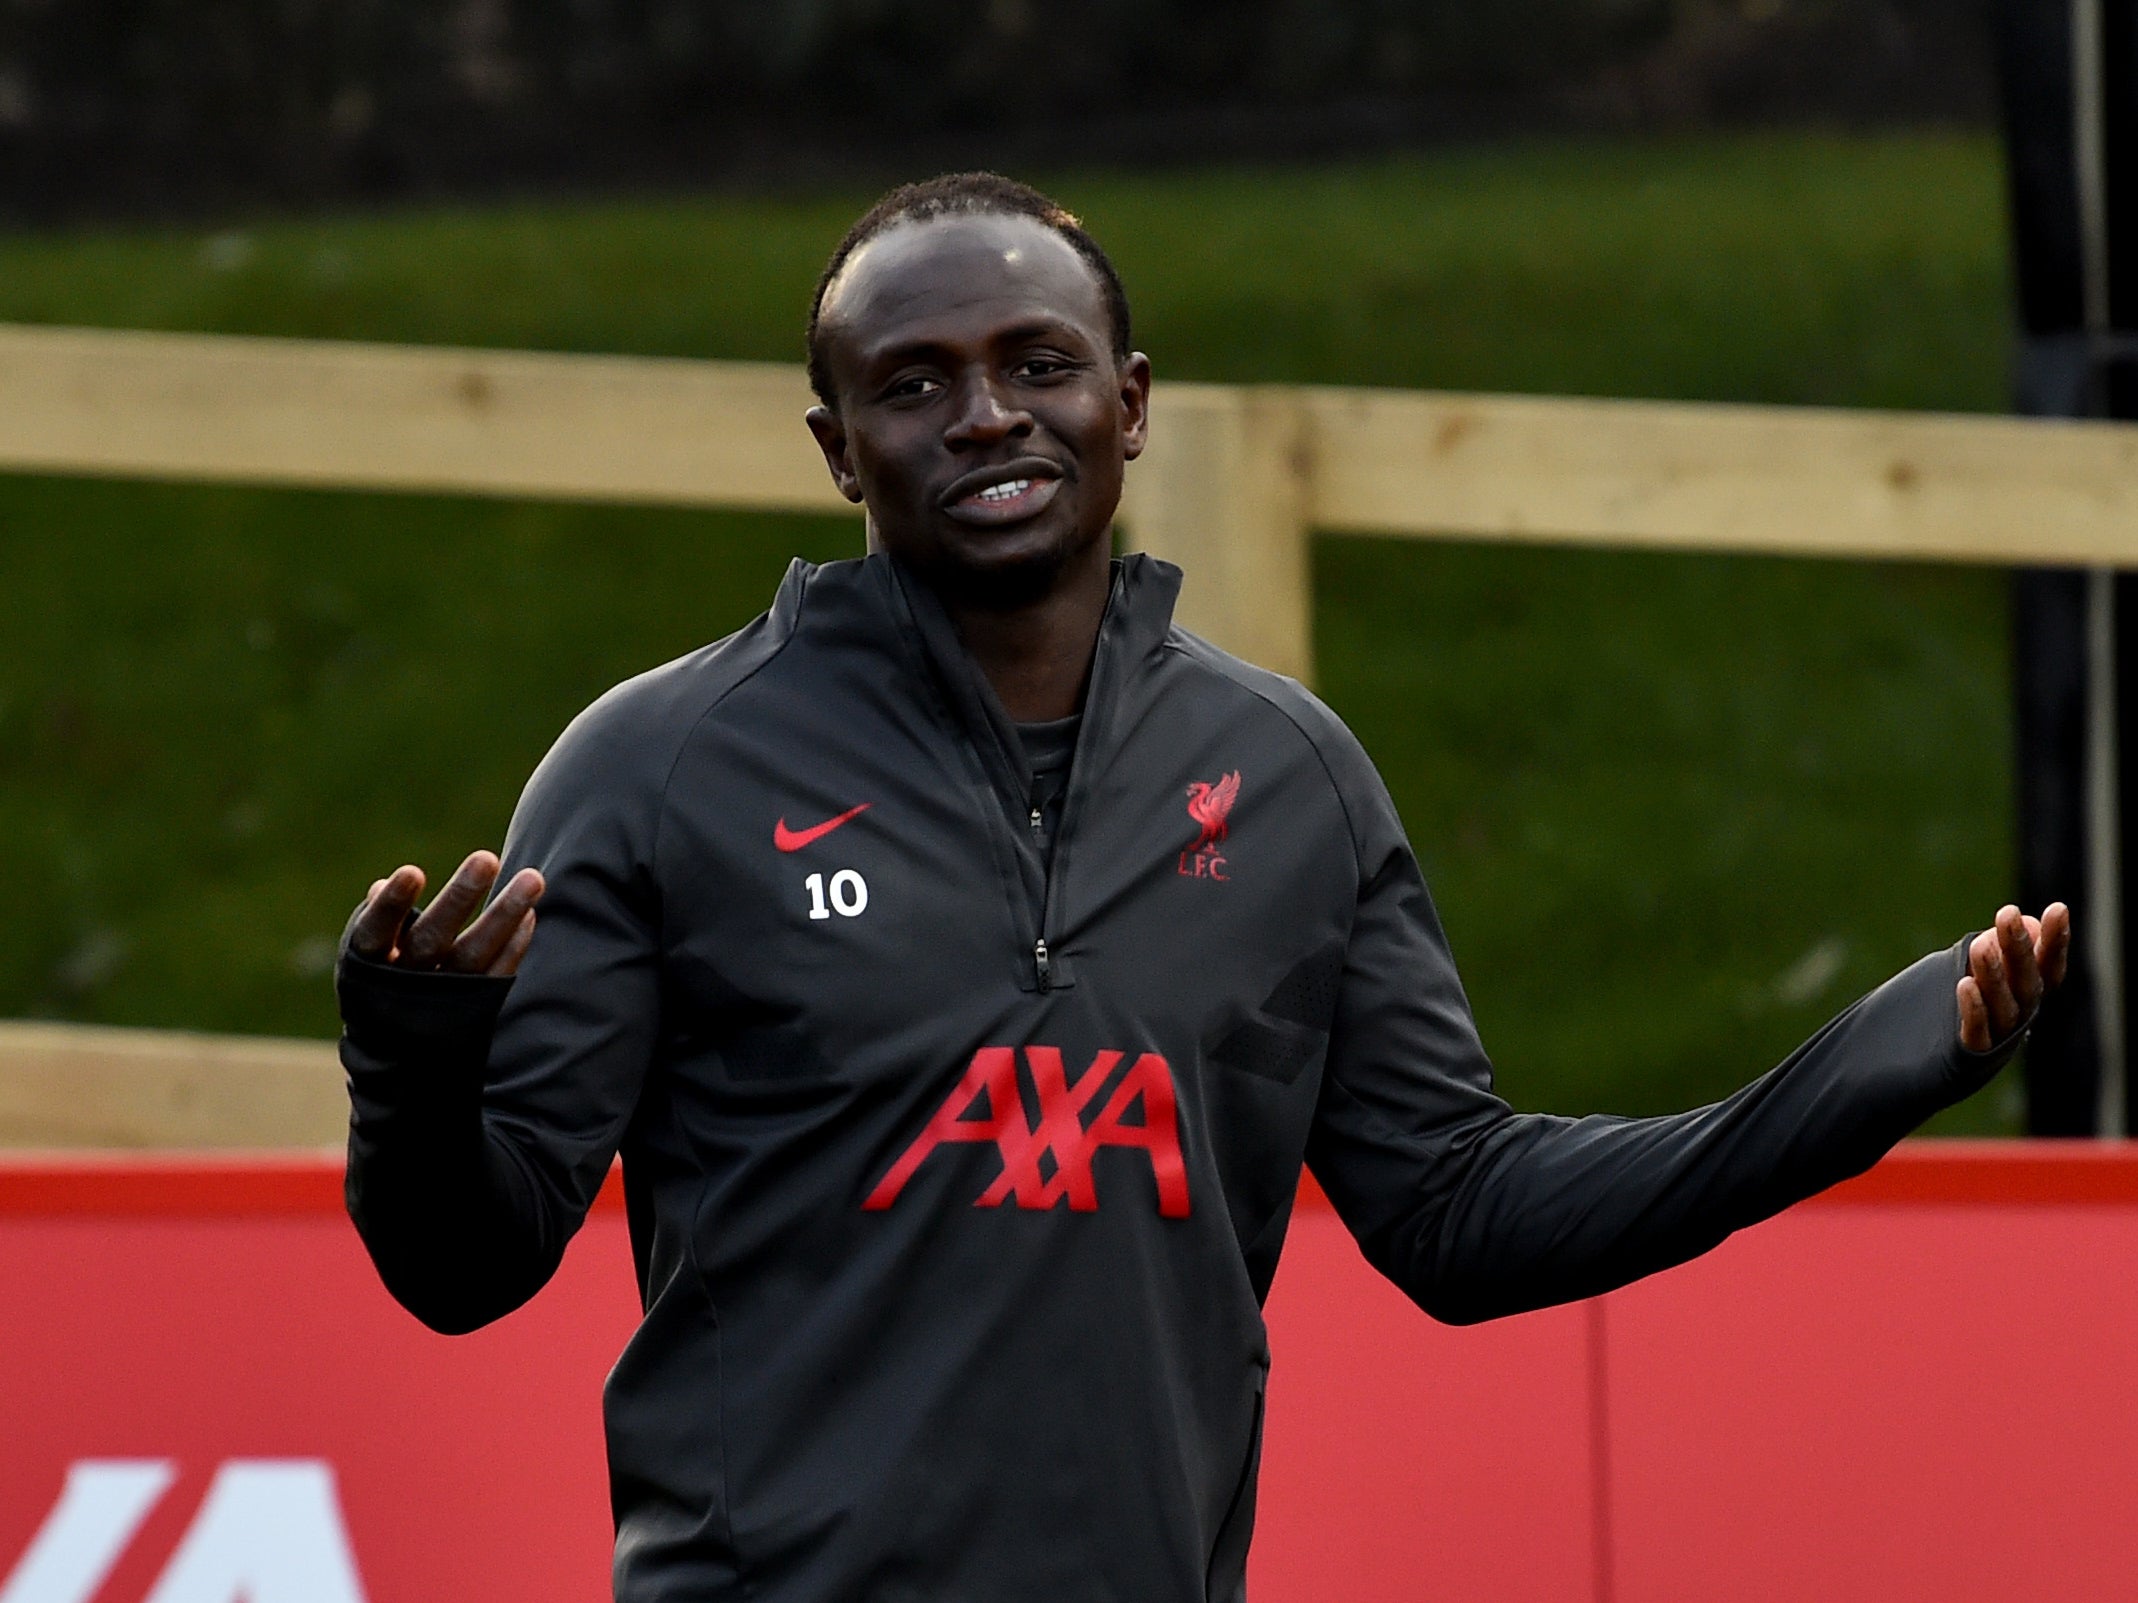 Sadio Mane has opened up on the tough title defence for the Reds